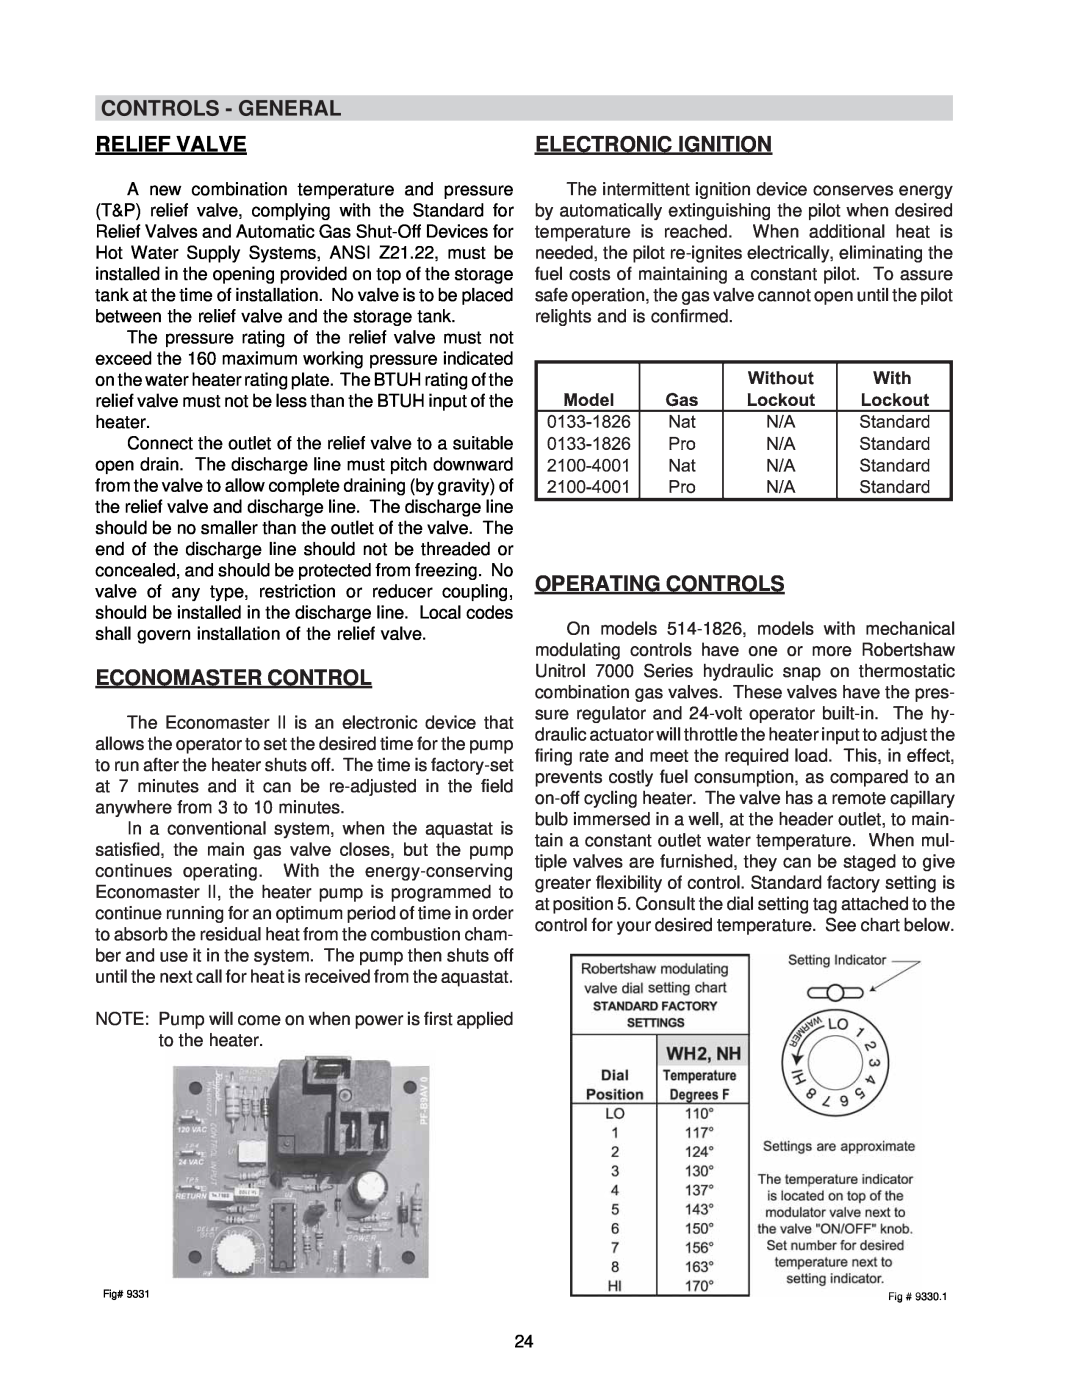 Raypak 0133-4001 manual Controls - General, Relief Valve, Electronic Ignition, Economaster Control, Operating Controls 